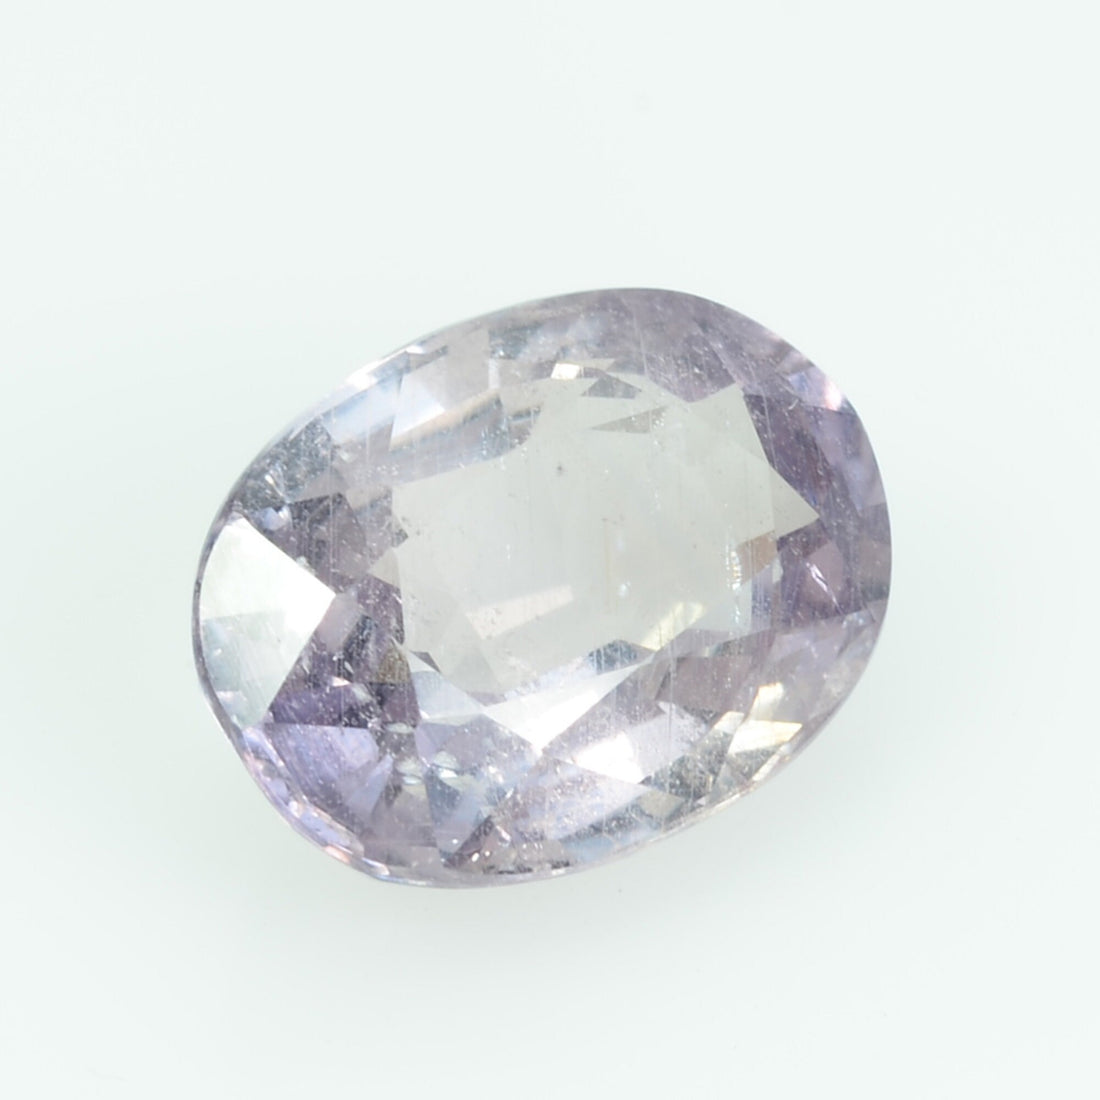 3.54 Cts Natural Violet Sapphire Loose Gemstone Oval Cut